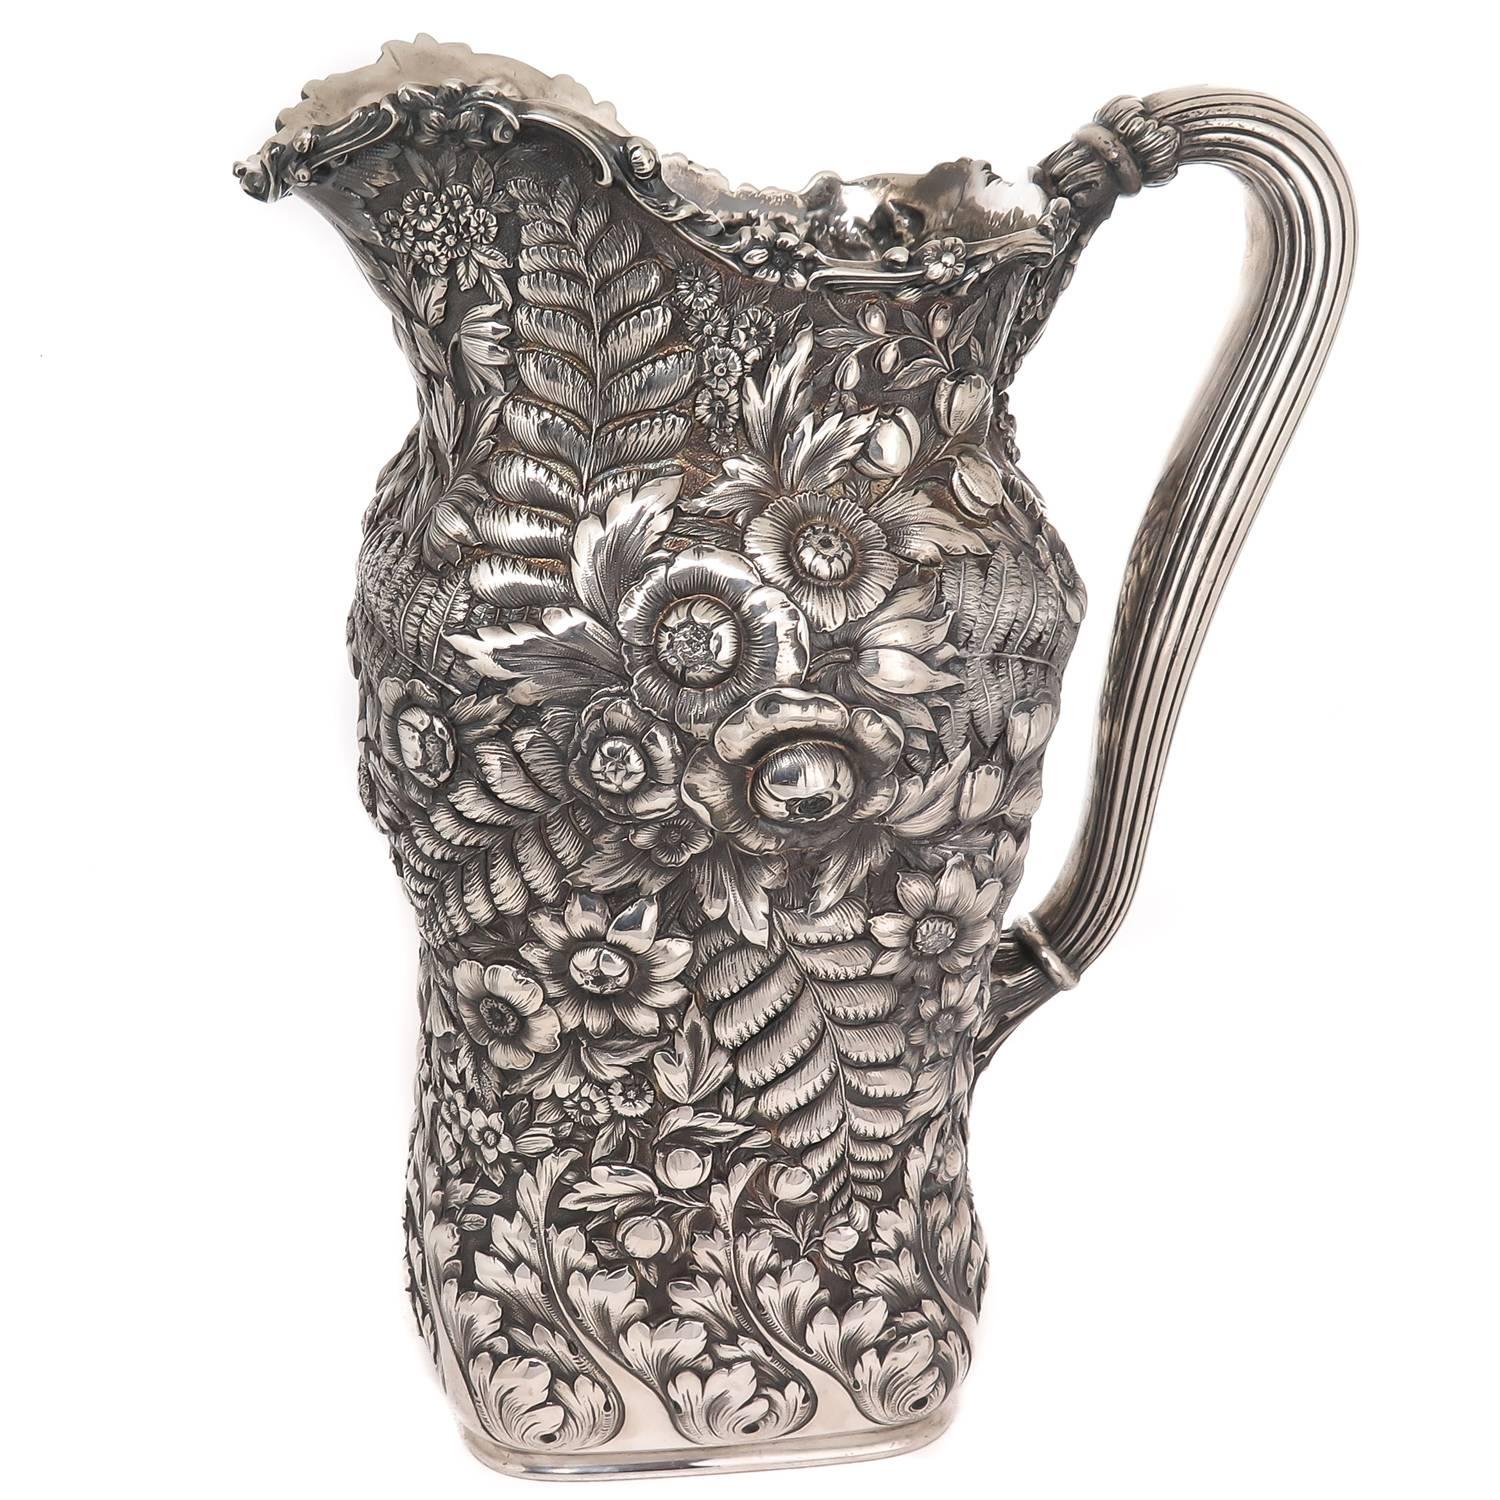 Tiffany & Co. Large Aesthetic Period Heavy Repousse Silver Pitcher